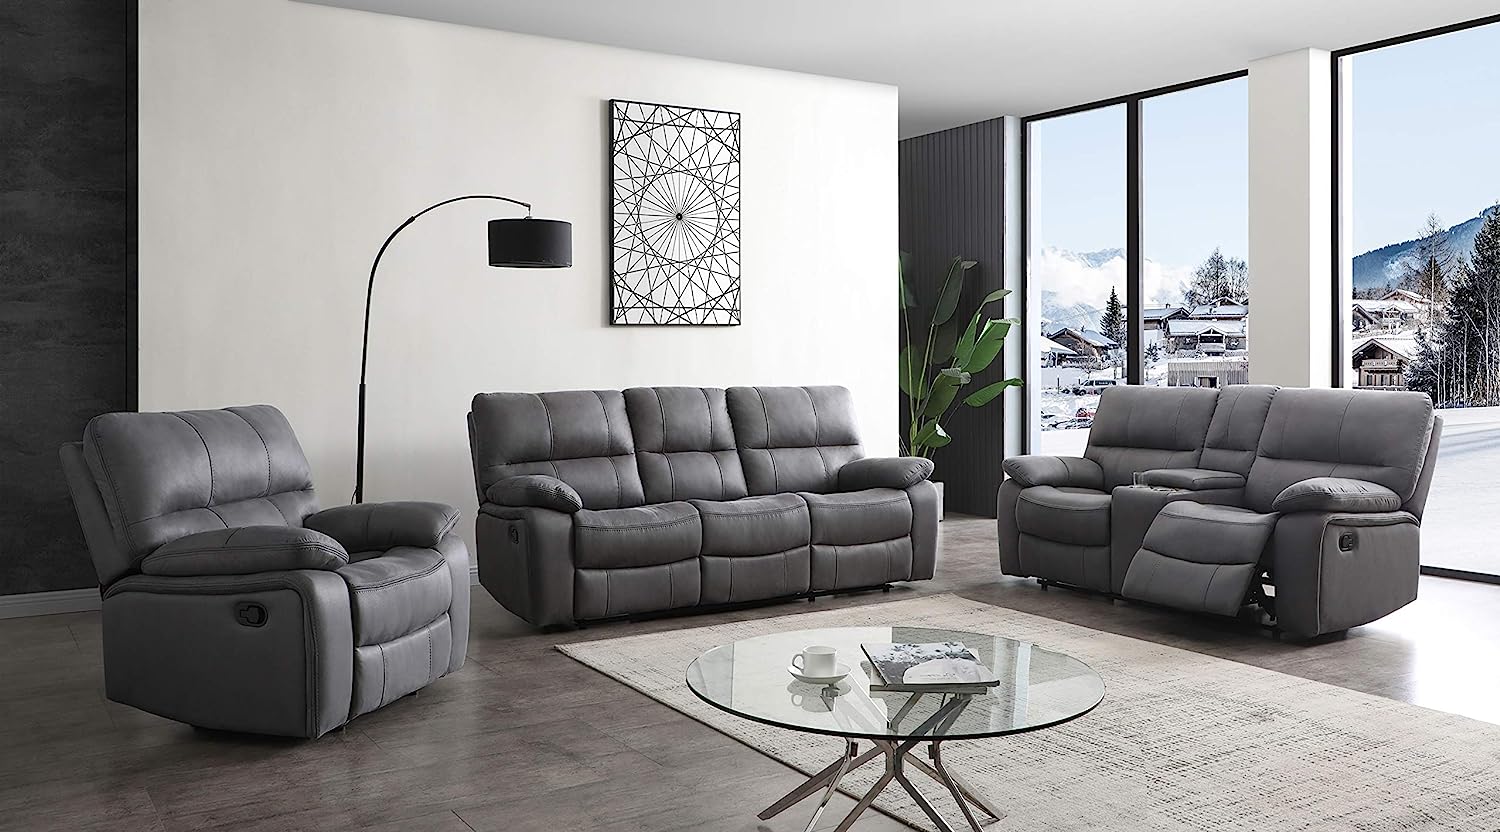 Betsy Furniture Microfiber Reclining Sofa Couch Set [...]